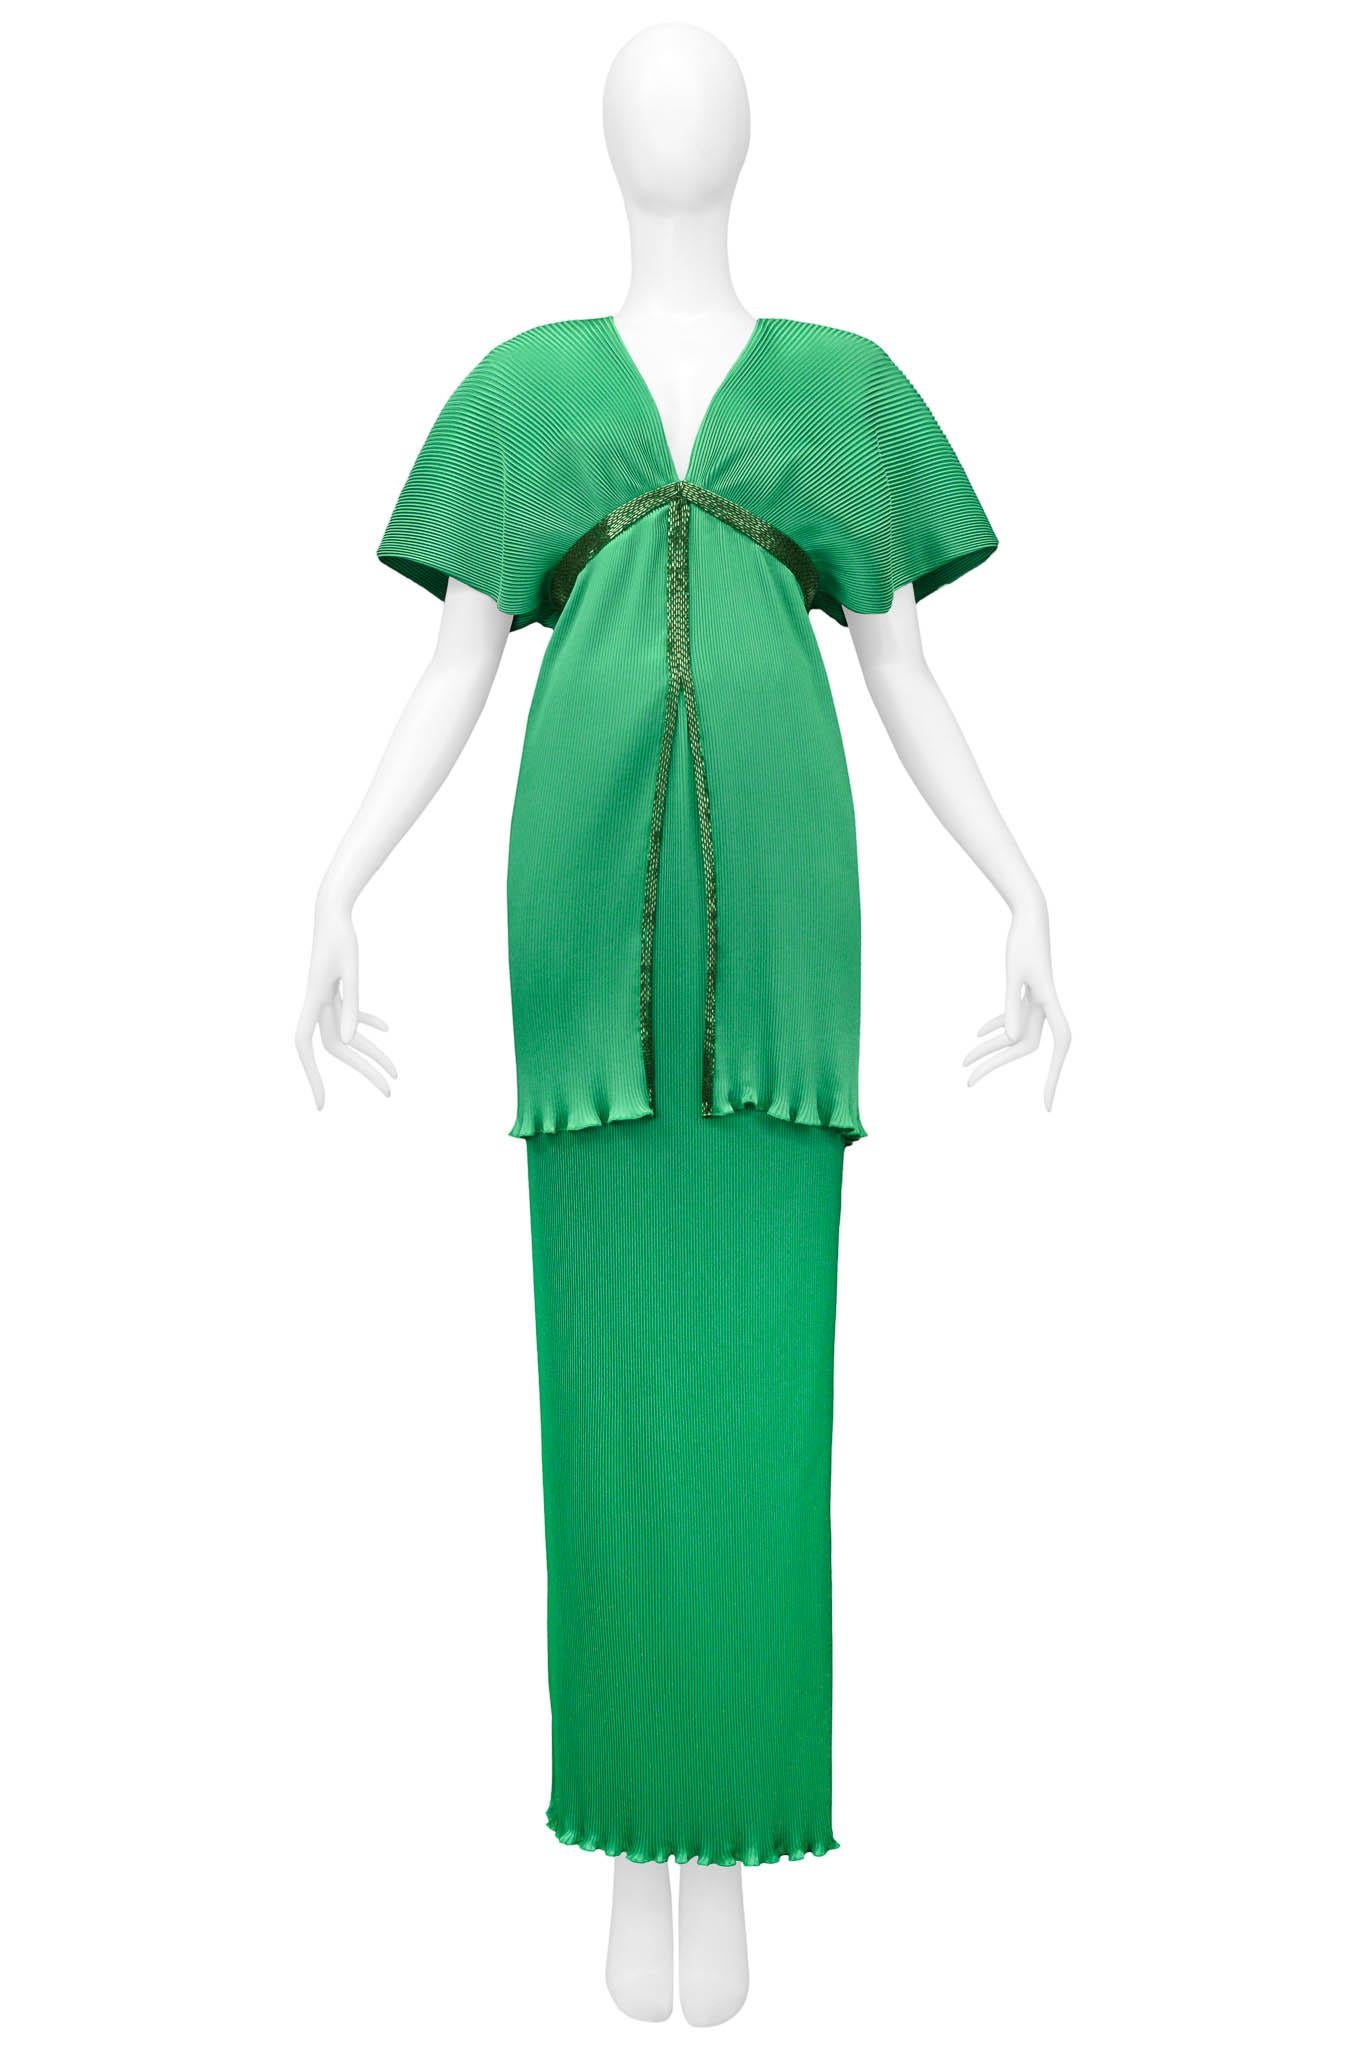 Resurrection Vintage is excited to offer a stunning vintage emerald green Yuki pleated top and skirt ensemble featuring, green bugle bead trim, lettuce hem, shoulder pads, a zipper down the back for the top, and an elastic waistband for the